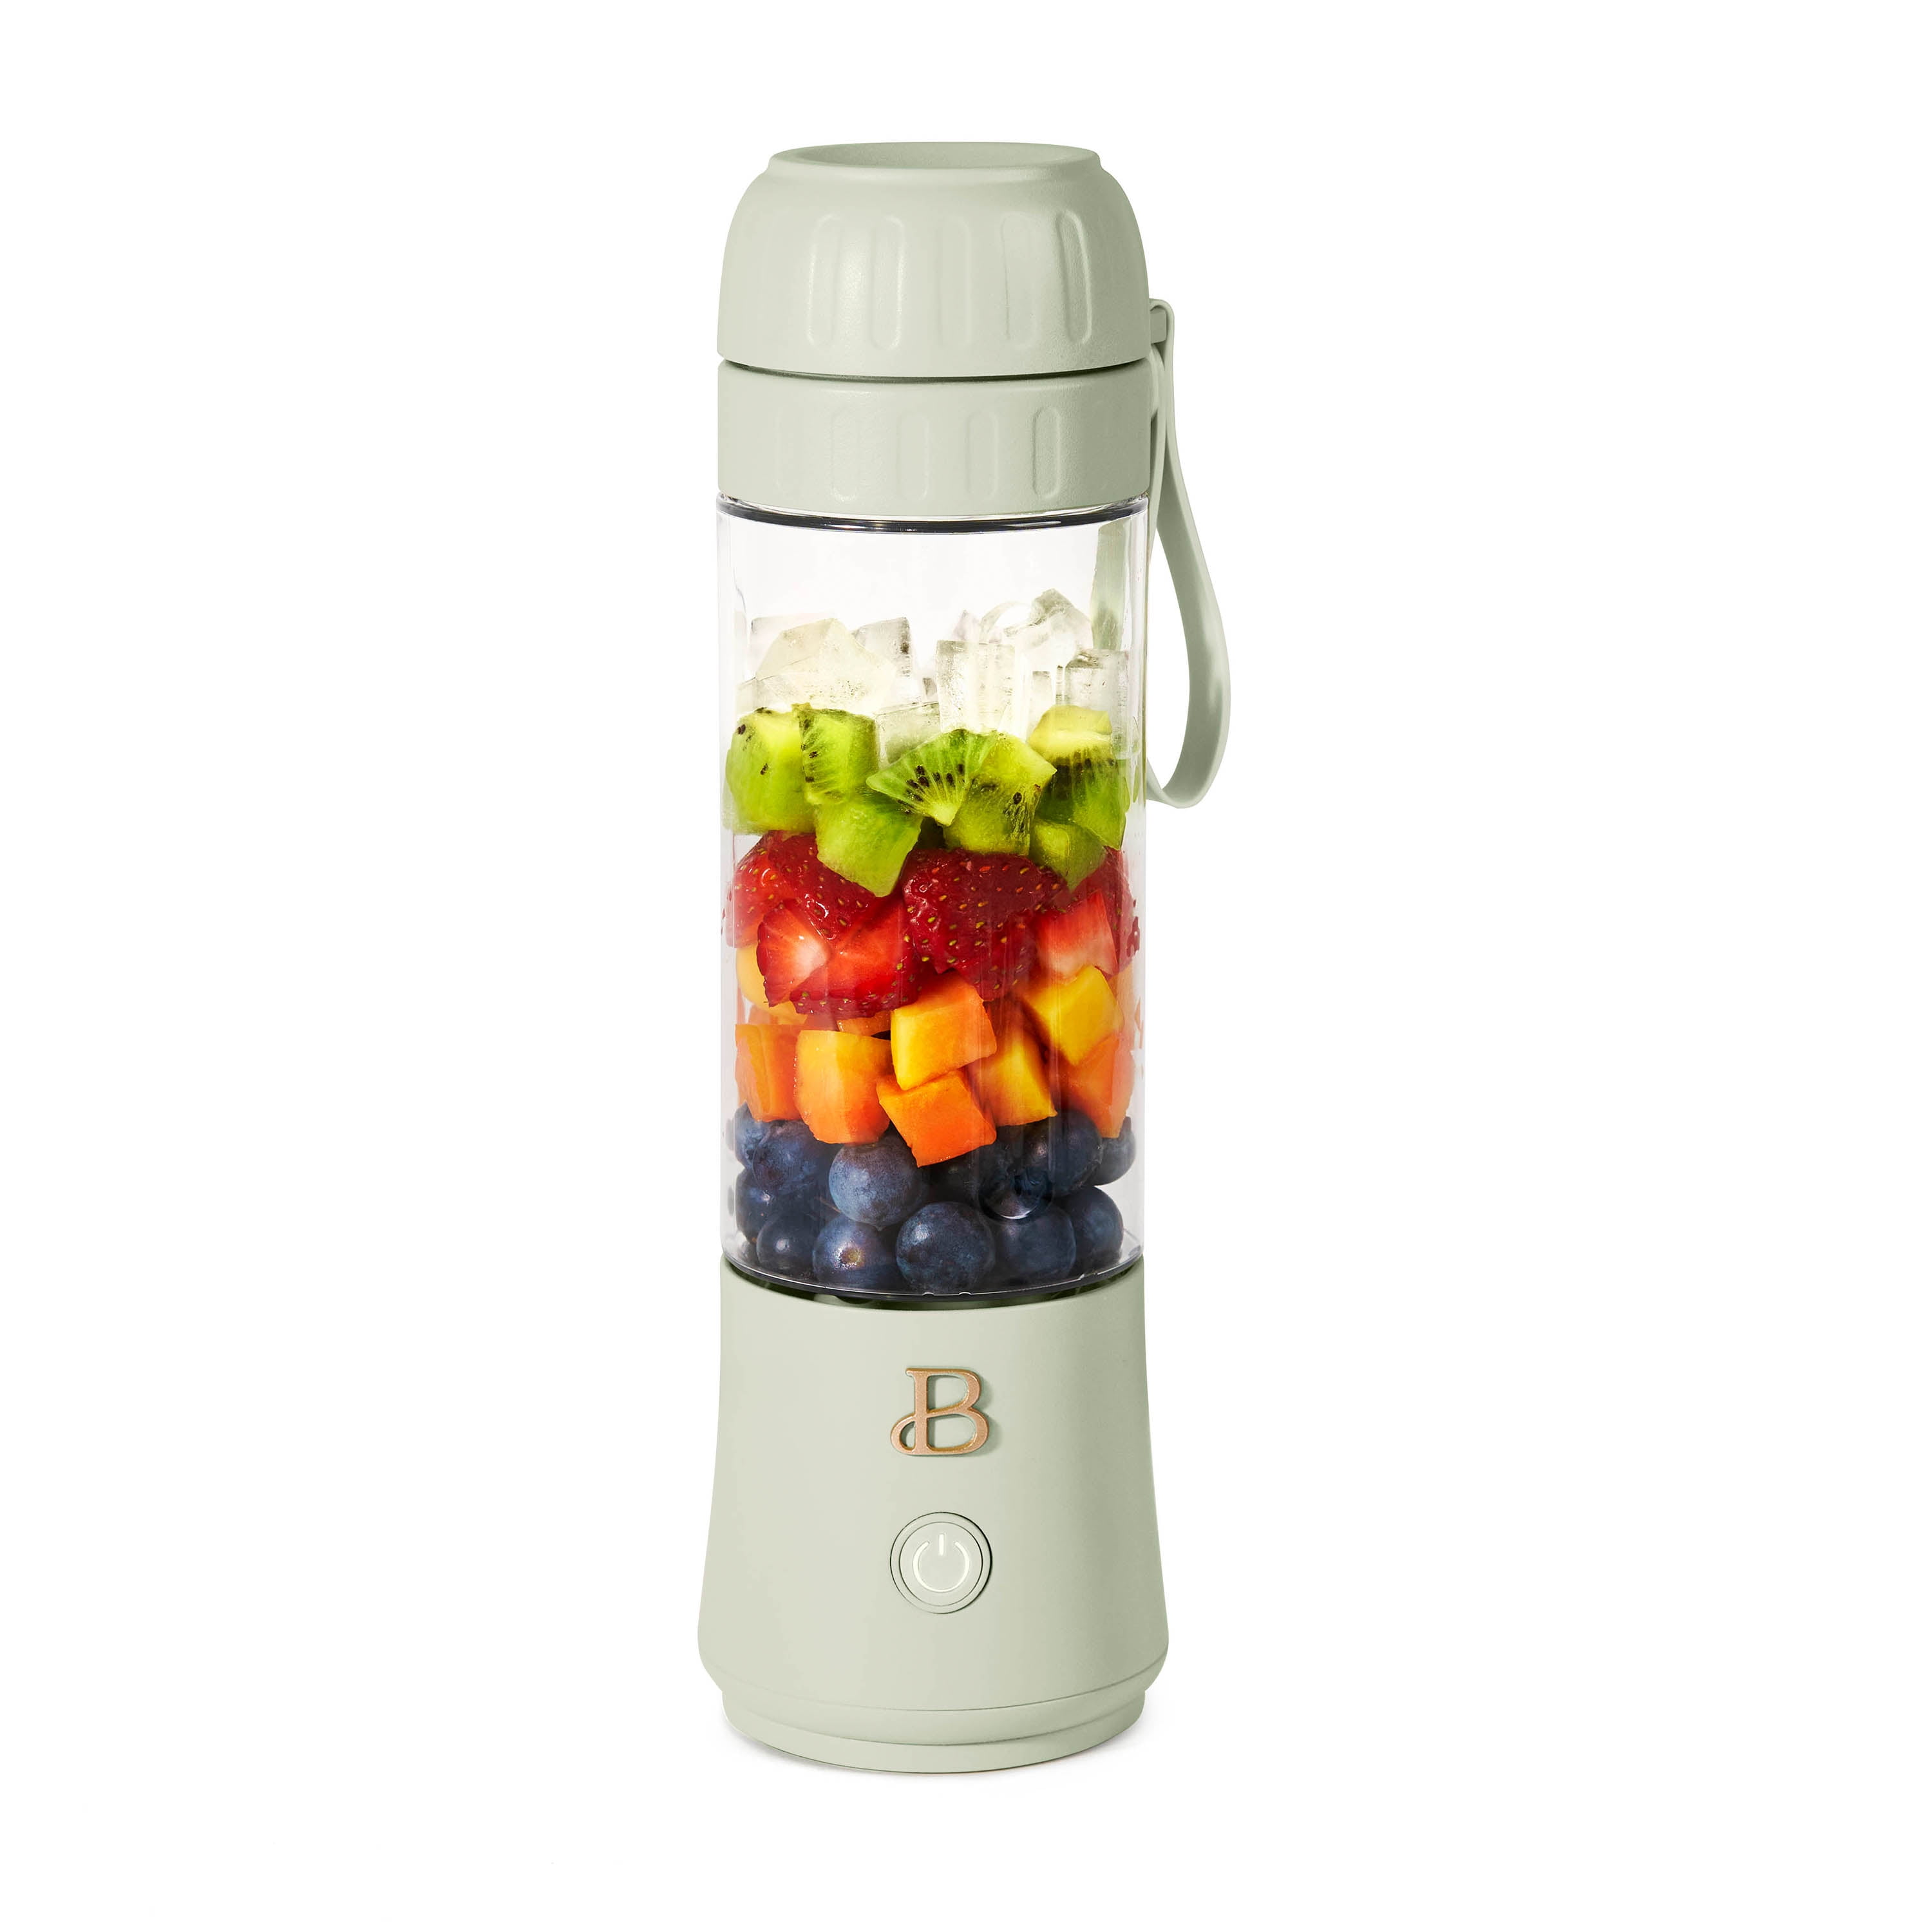 Beautiful Portable To-Go Blender 2.0, 70 W, 16 oz, Sage Green by Drew Barrymore